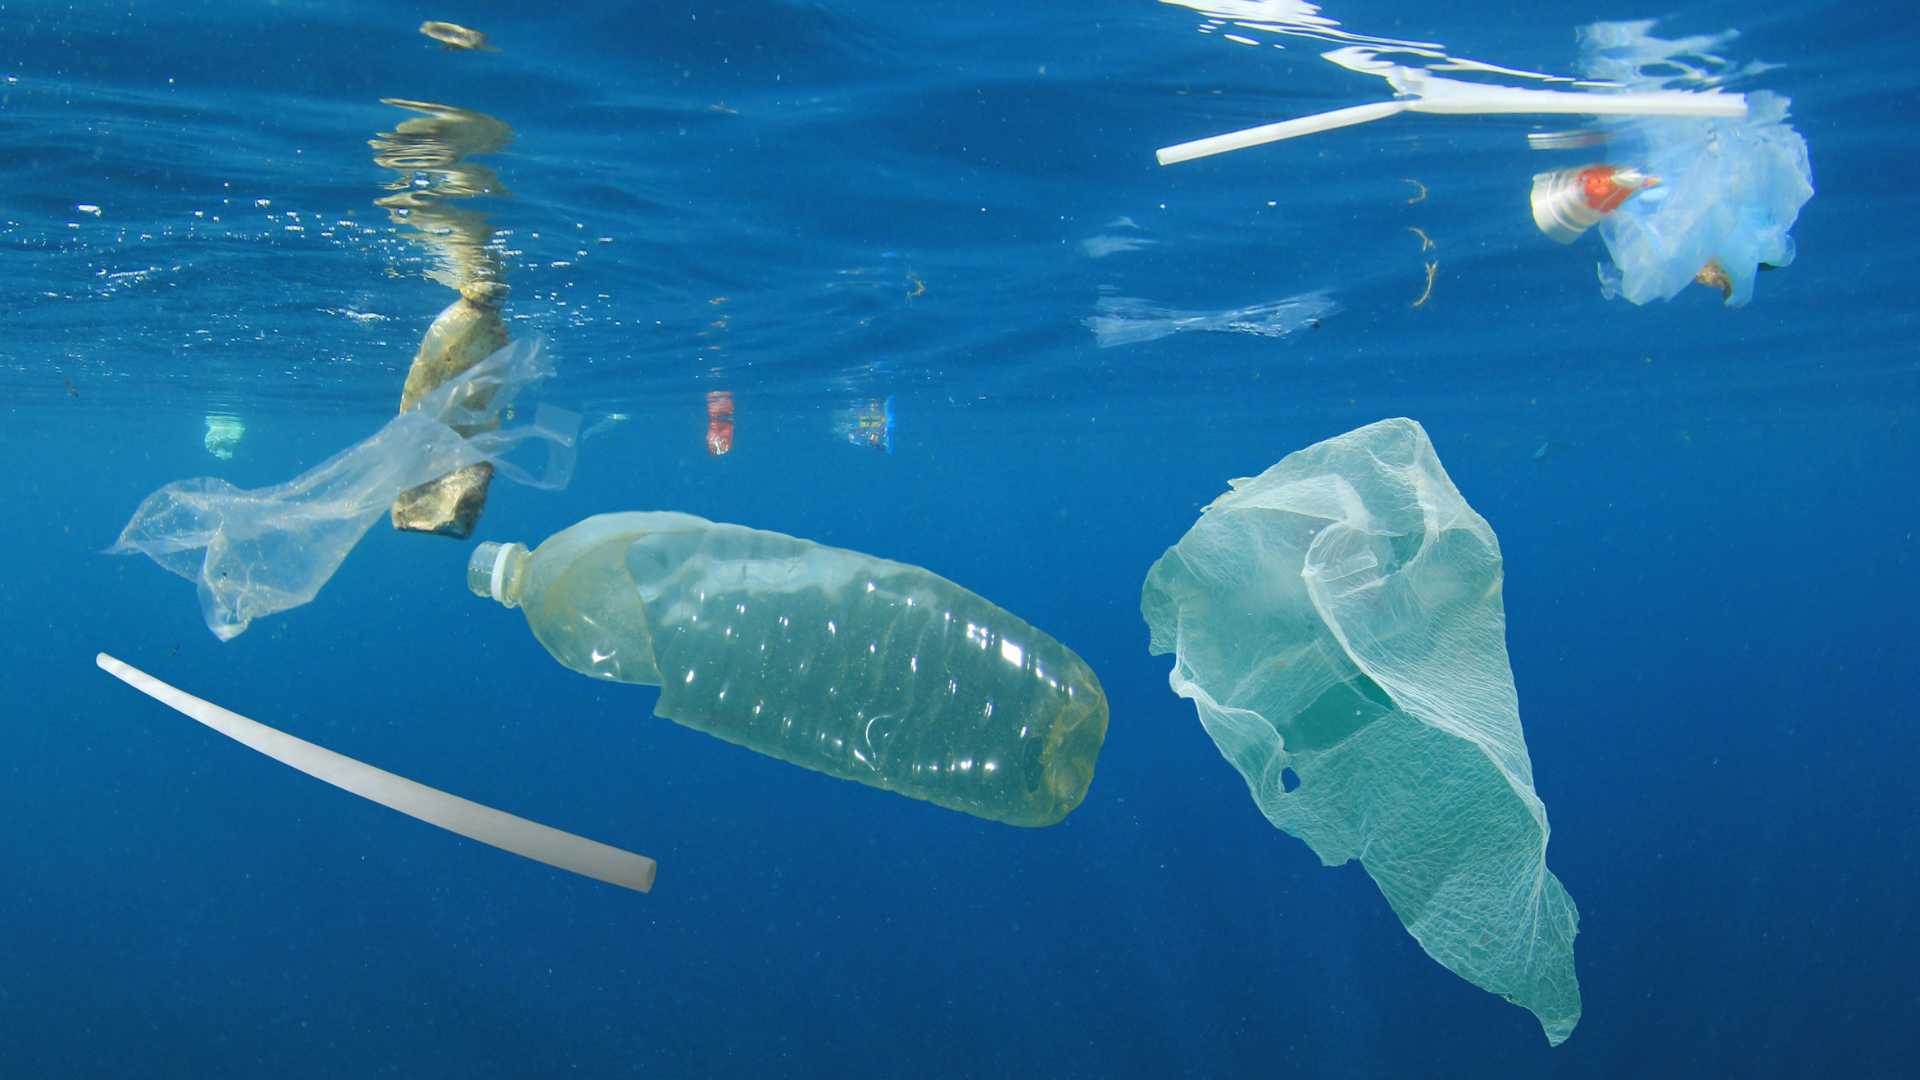 The Challenge of Ocean Plastic Pollution